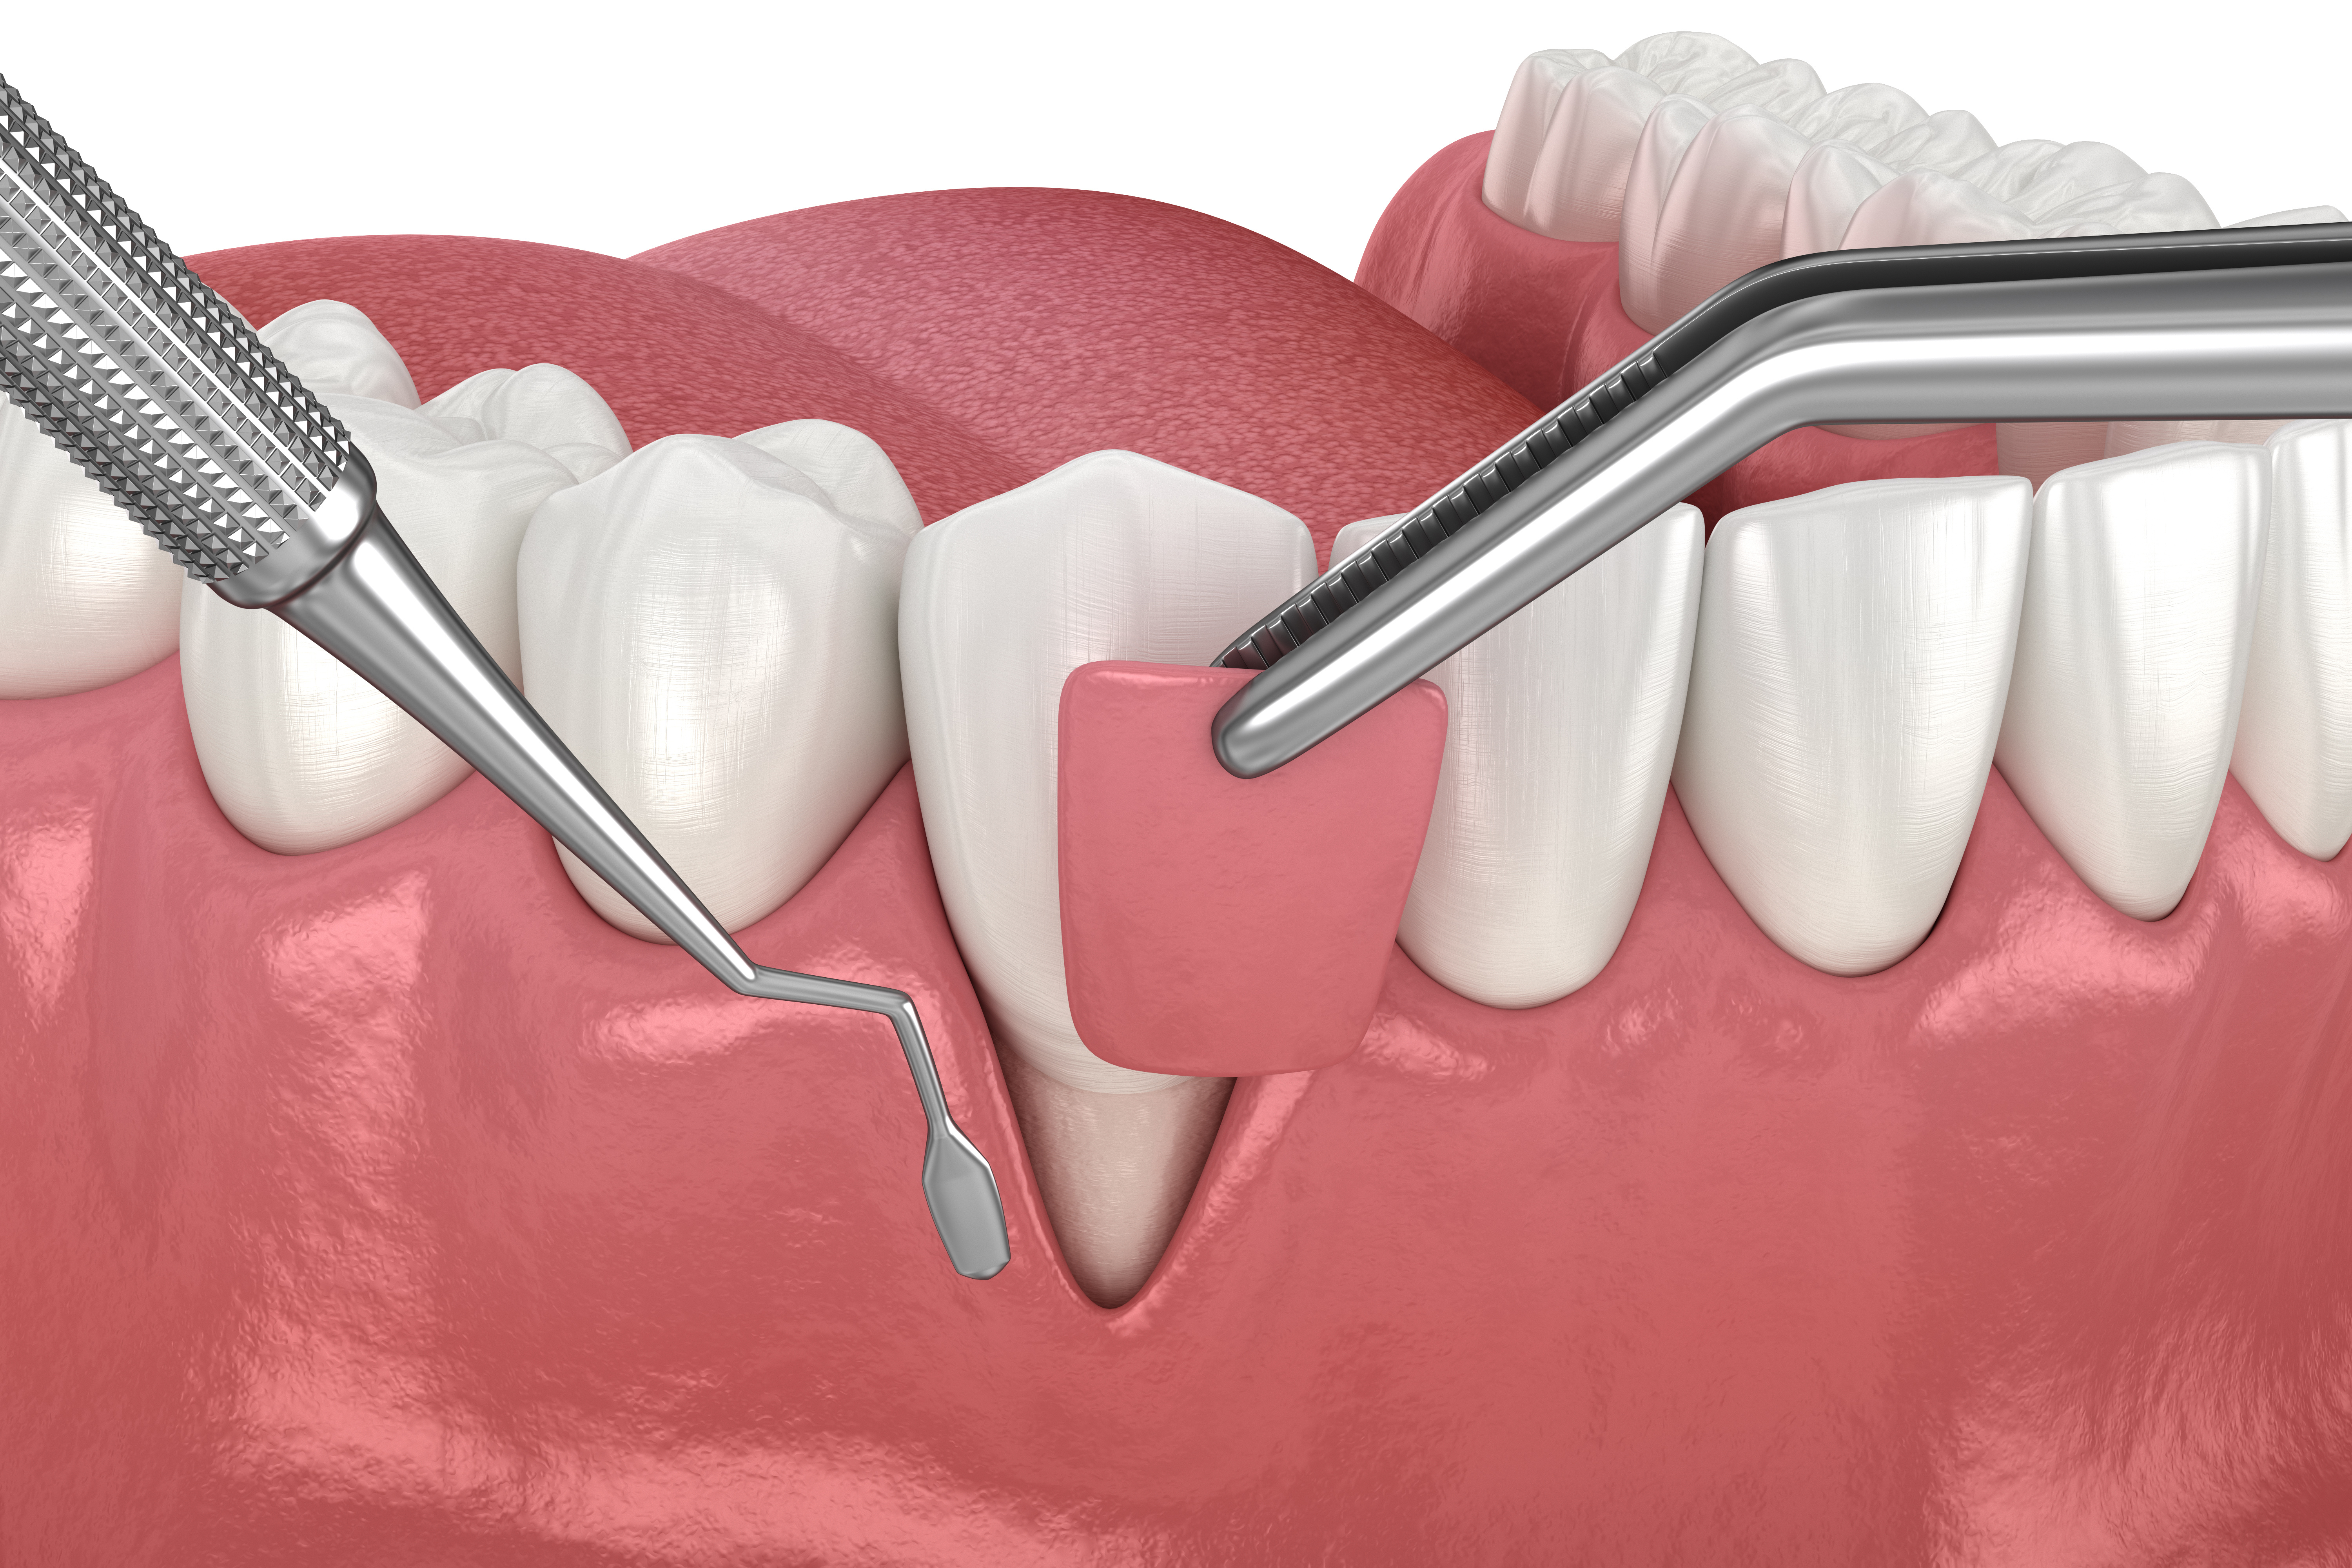 3D model of lower teeth showing a tissue graft being used to cover recession.